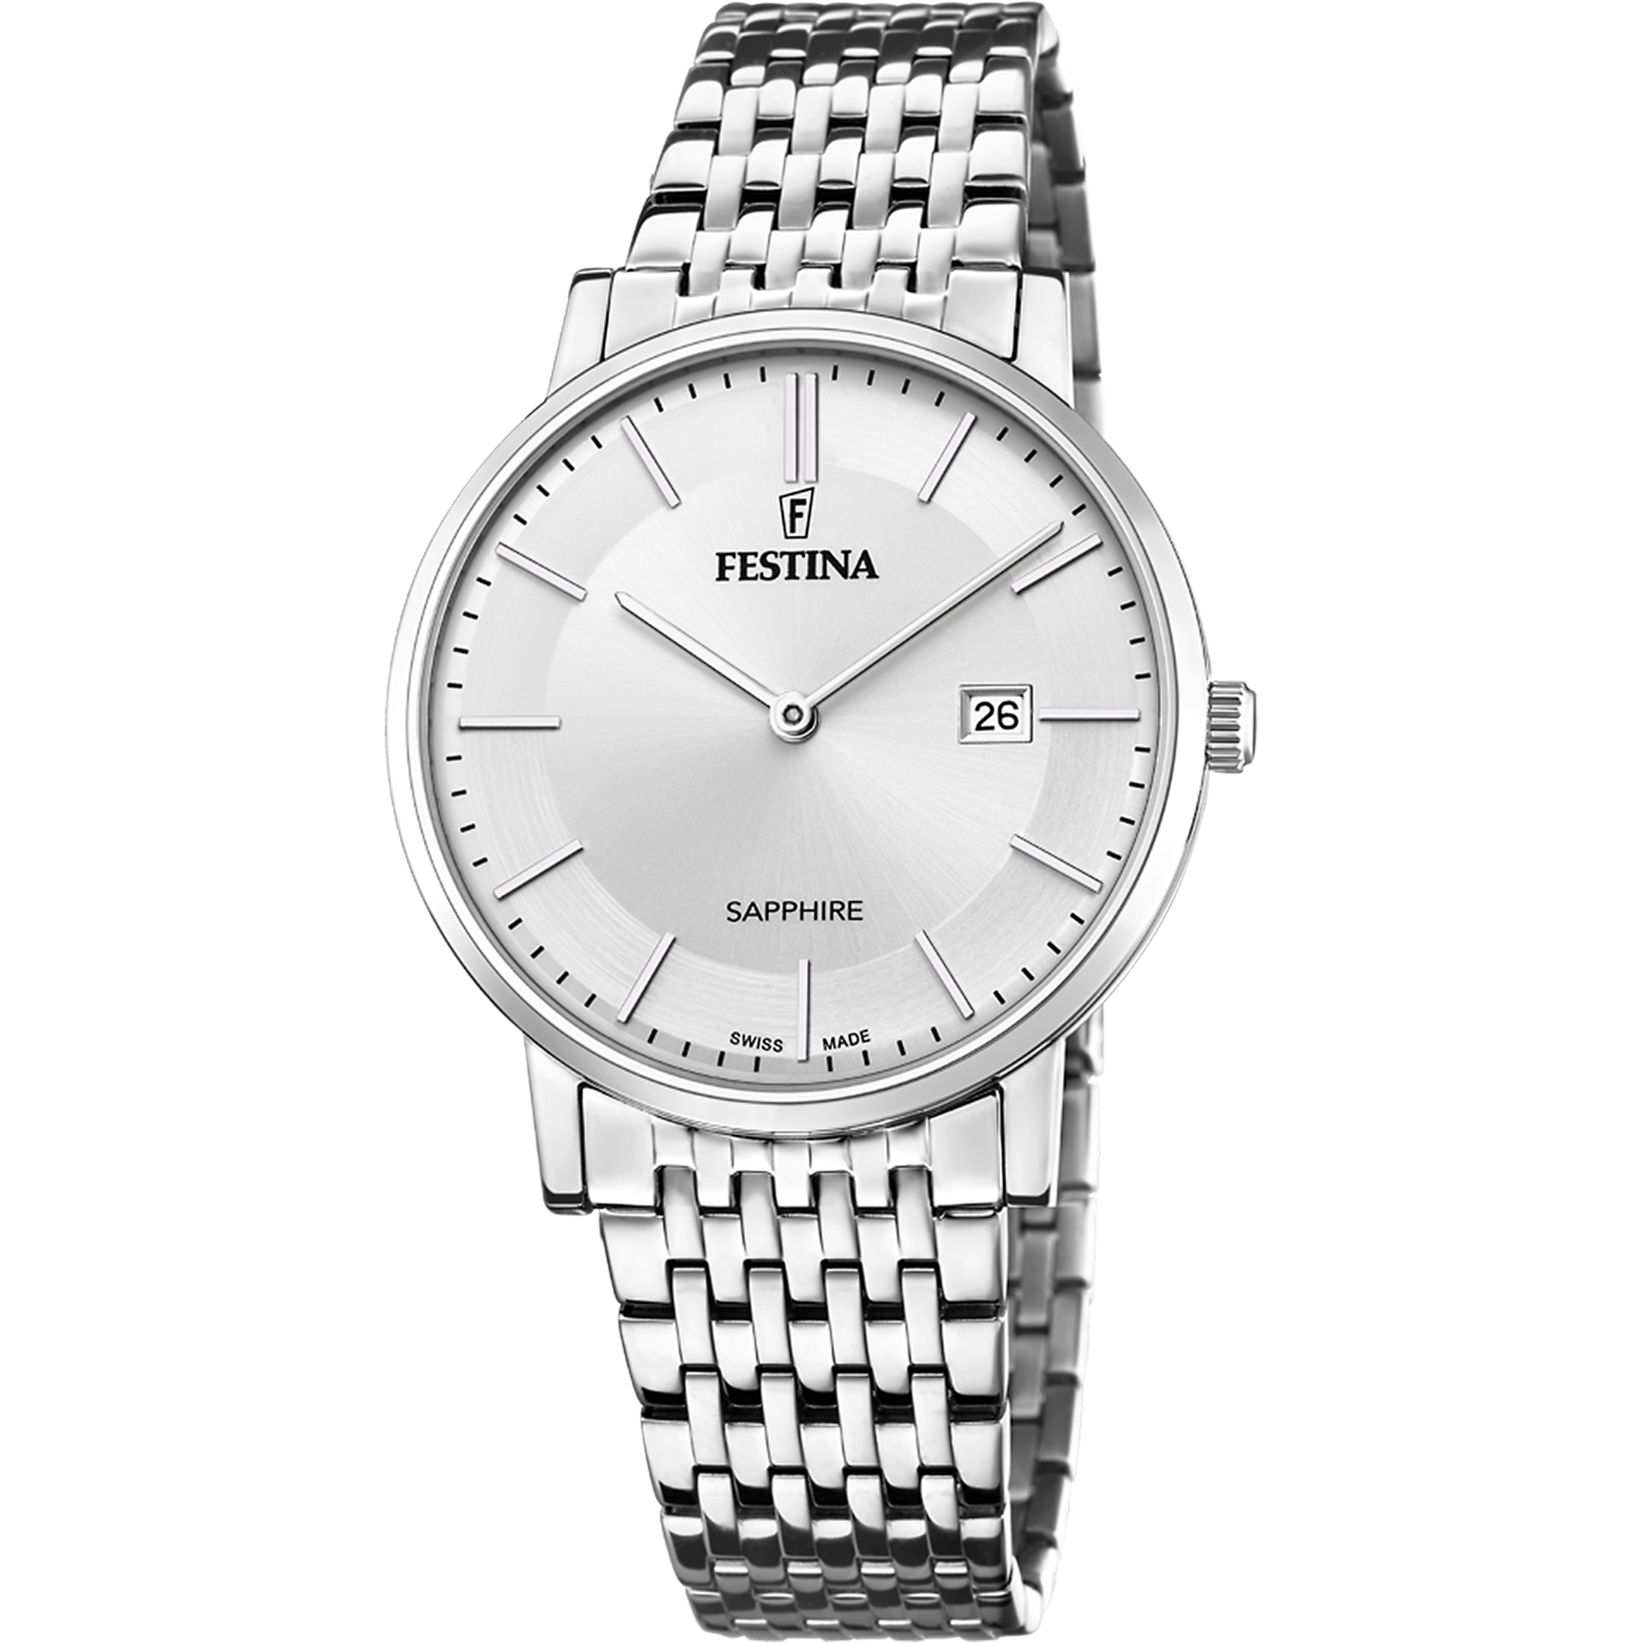 Festina Swiss Made F20018-1 - Analog - Strap Material Stainless Steel I Festina Watches USA